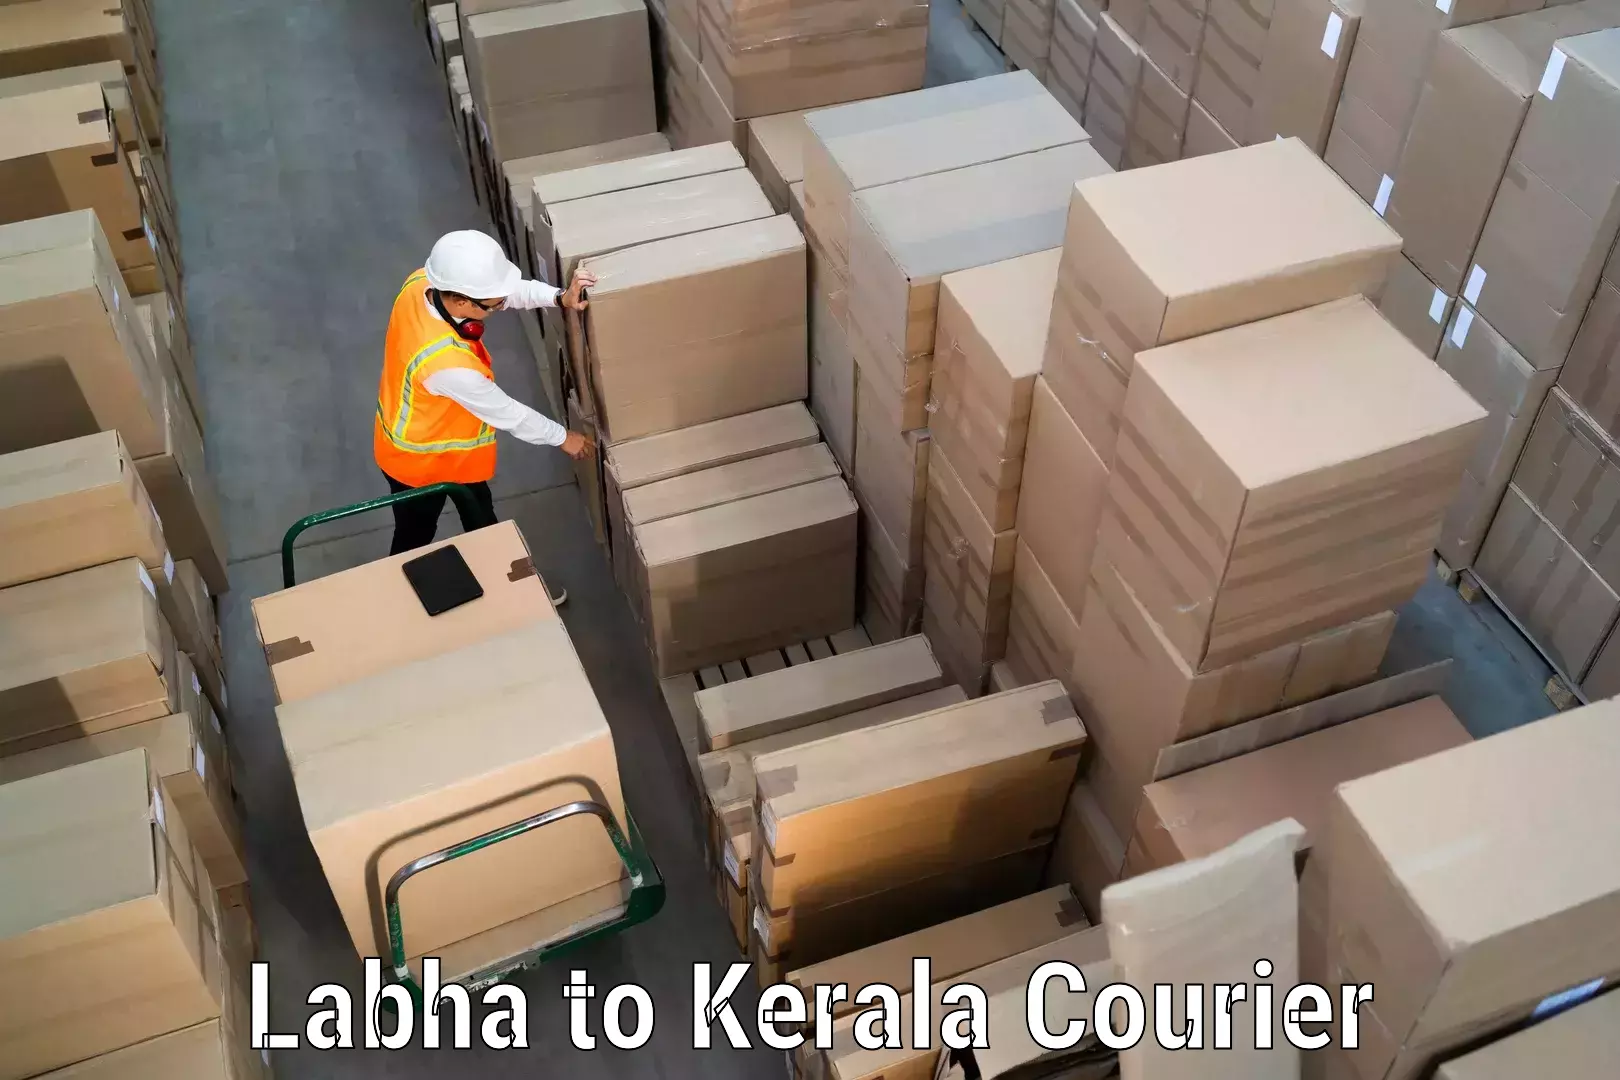 Courier service innovation Labha to Kollam